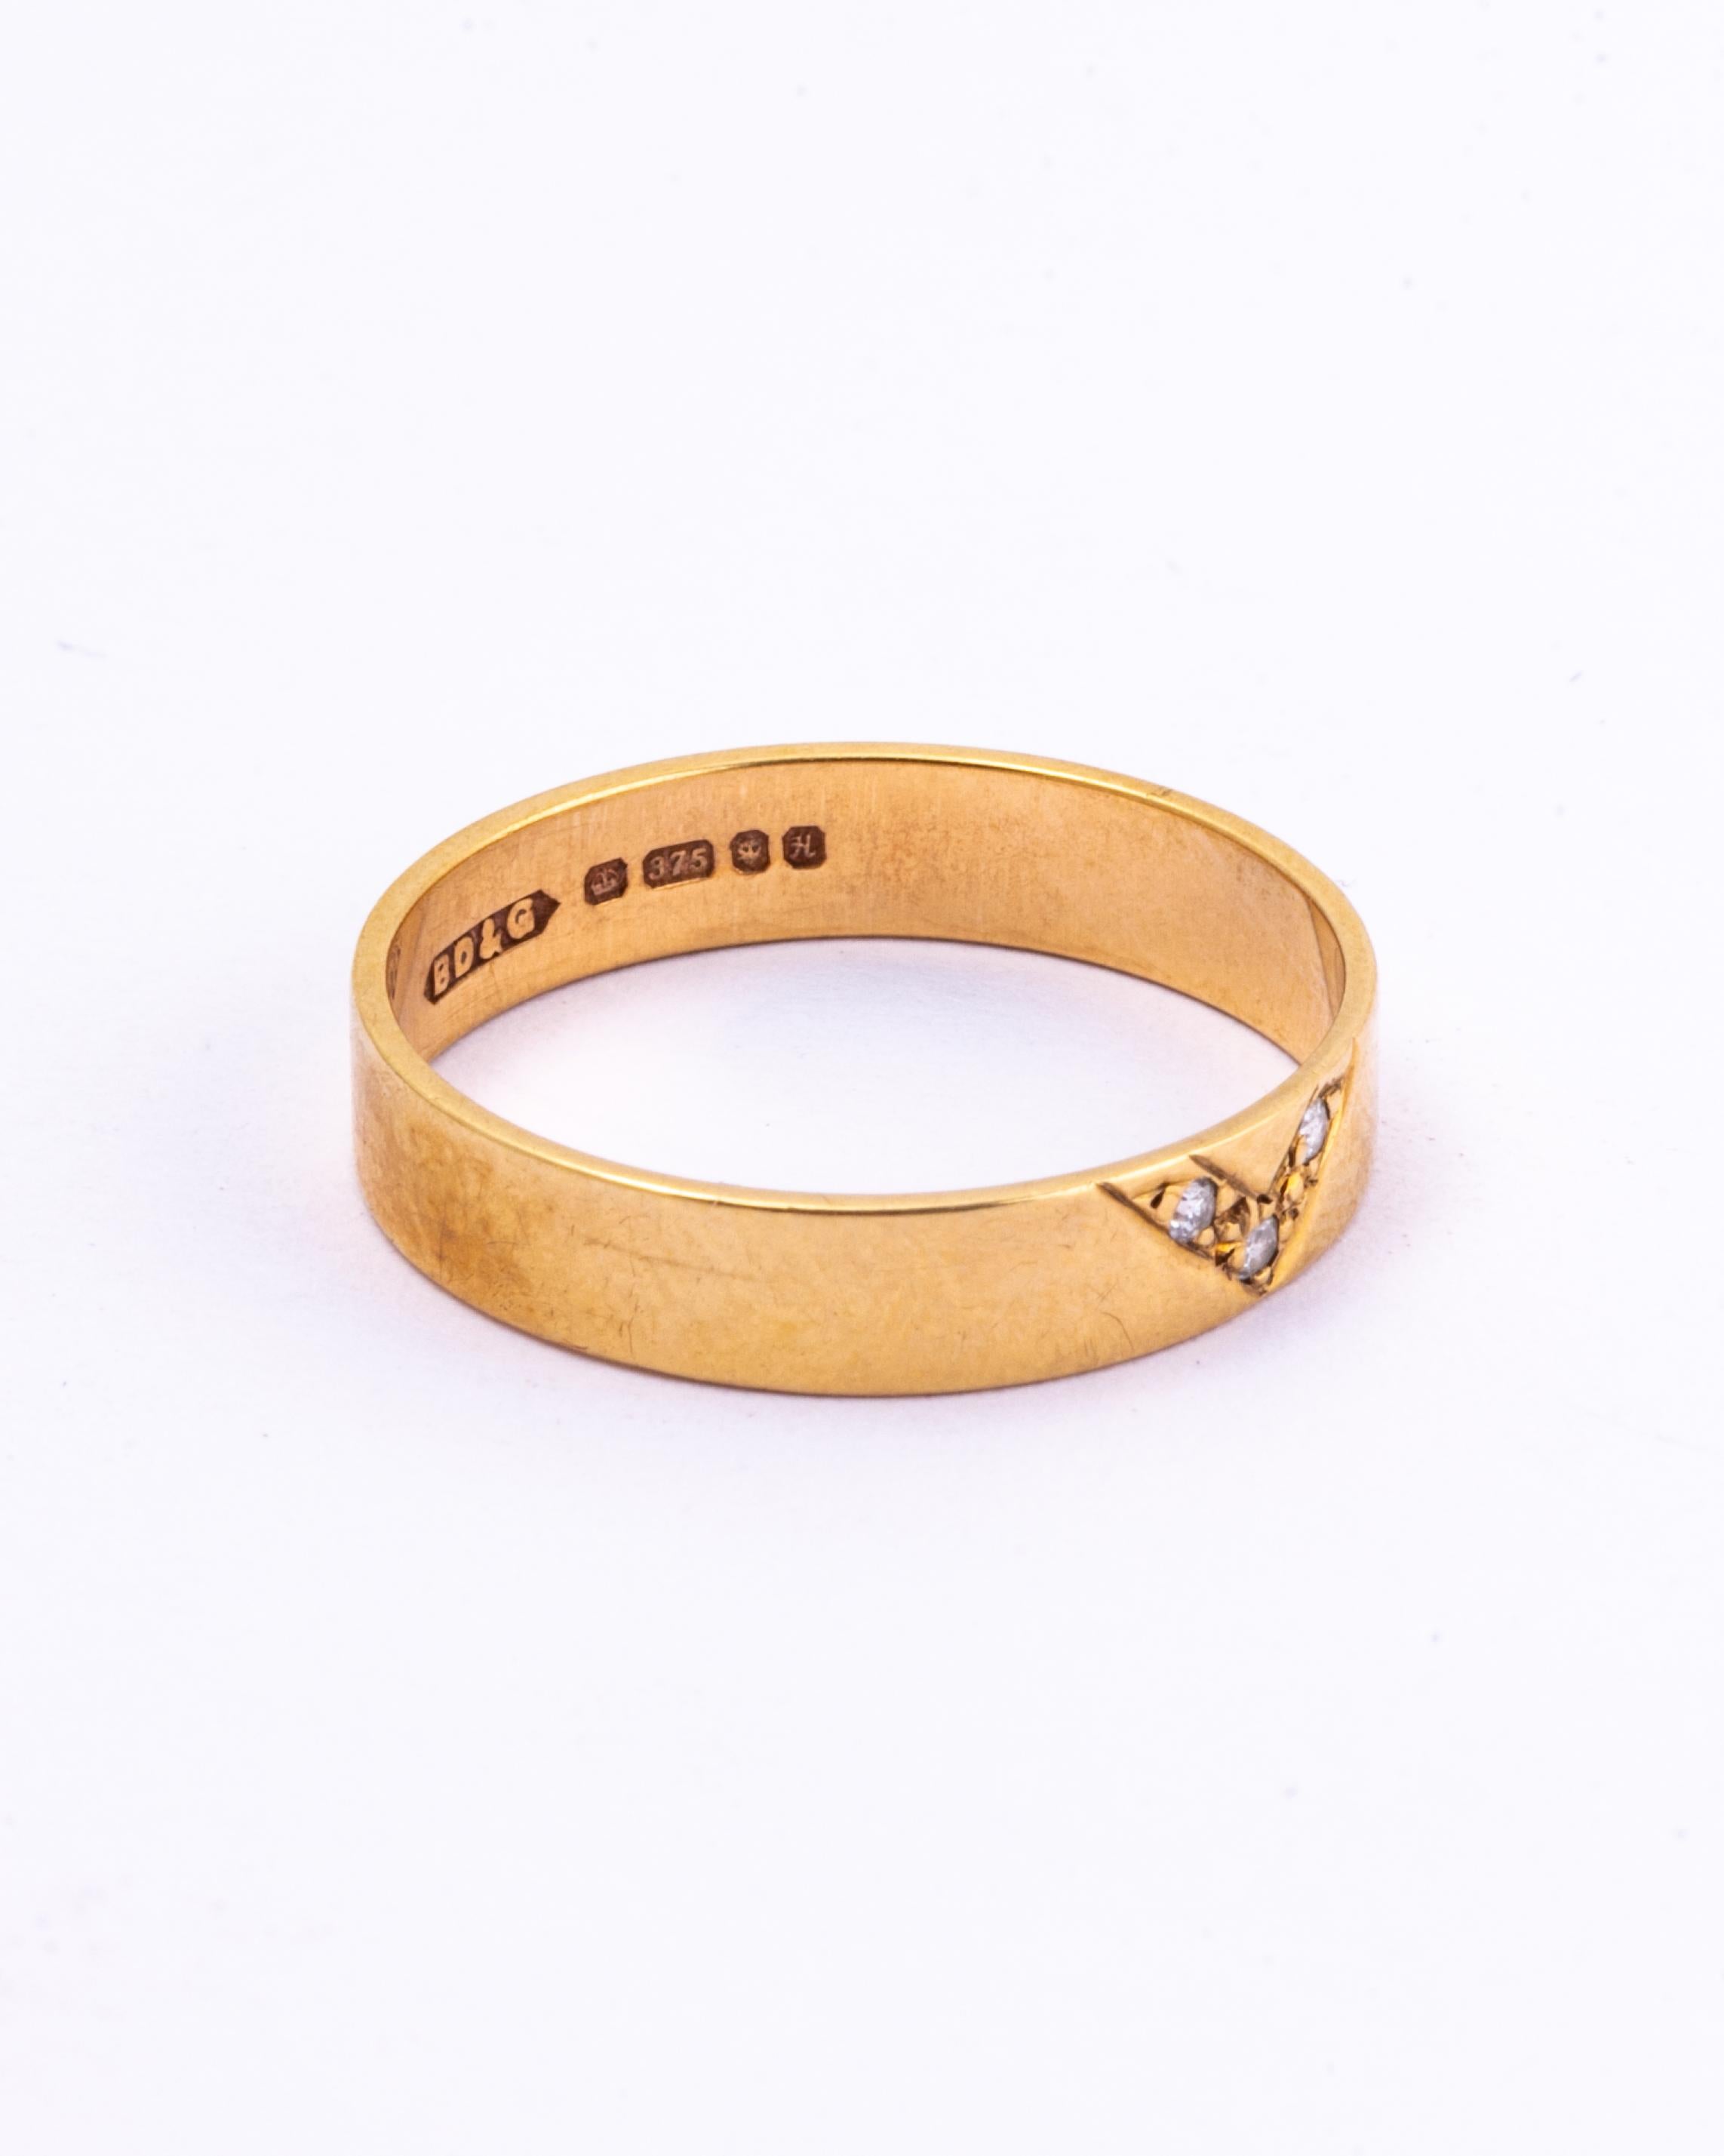 This classic band is modelled in 9carat gold and has a 'V' shape with three diamonds which total 10pts. Made in London and modelled in 9 Carat Gold. 

Size: O or 7 /4 
Width: 4.5mm

Weight: 1.7g